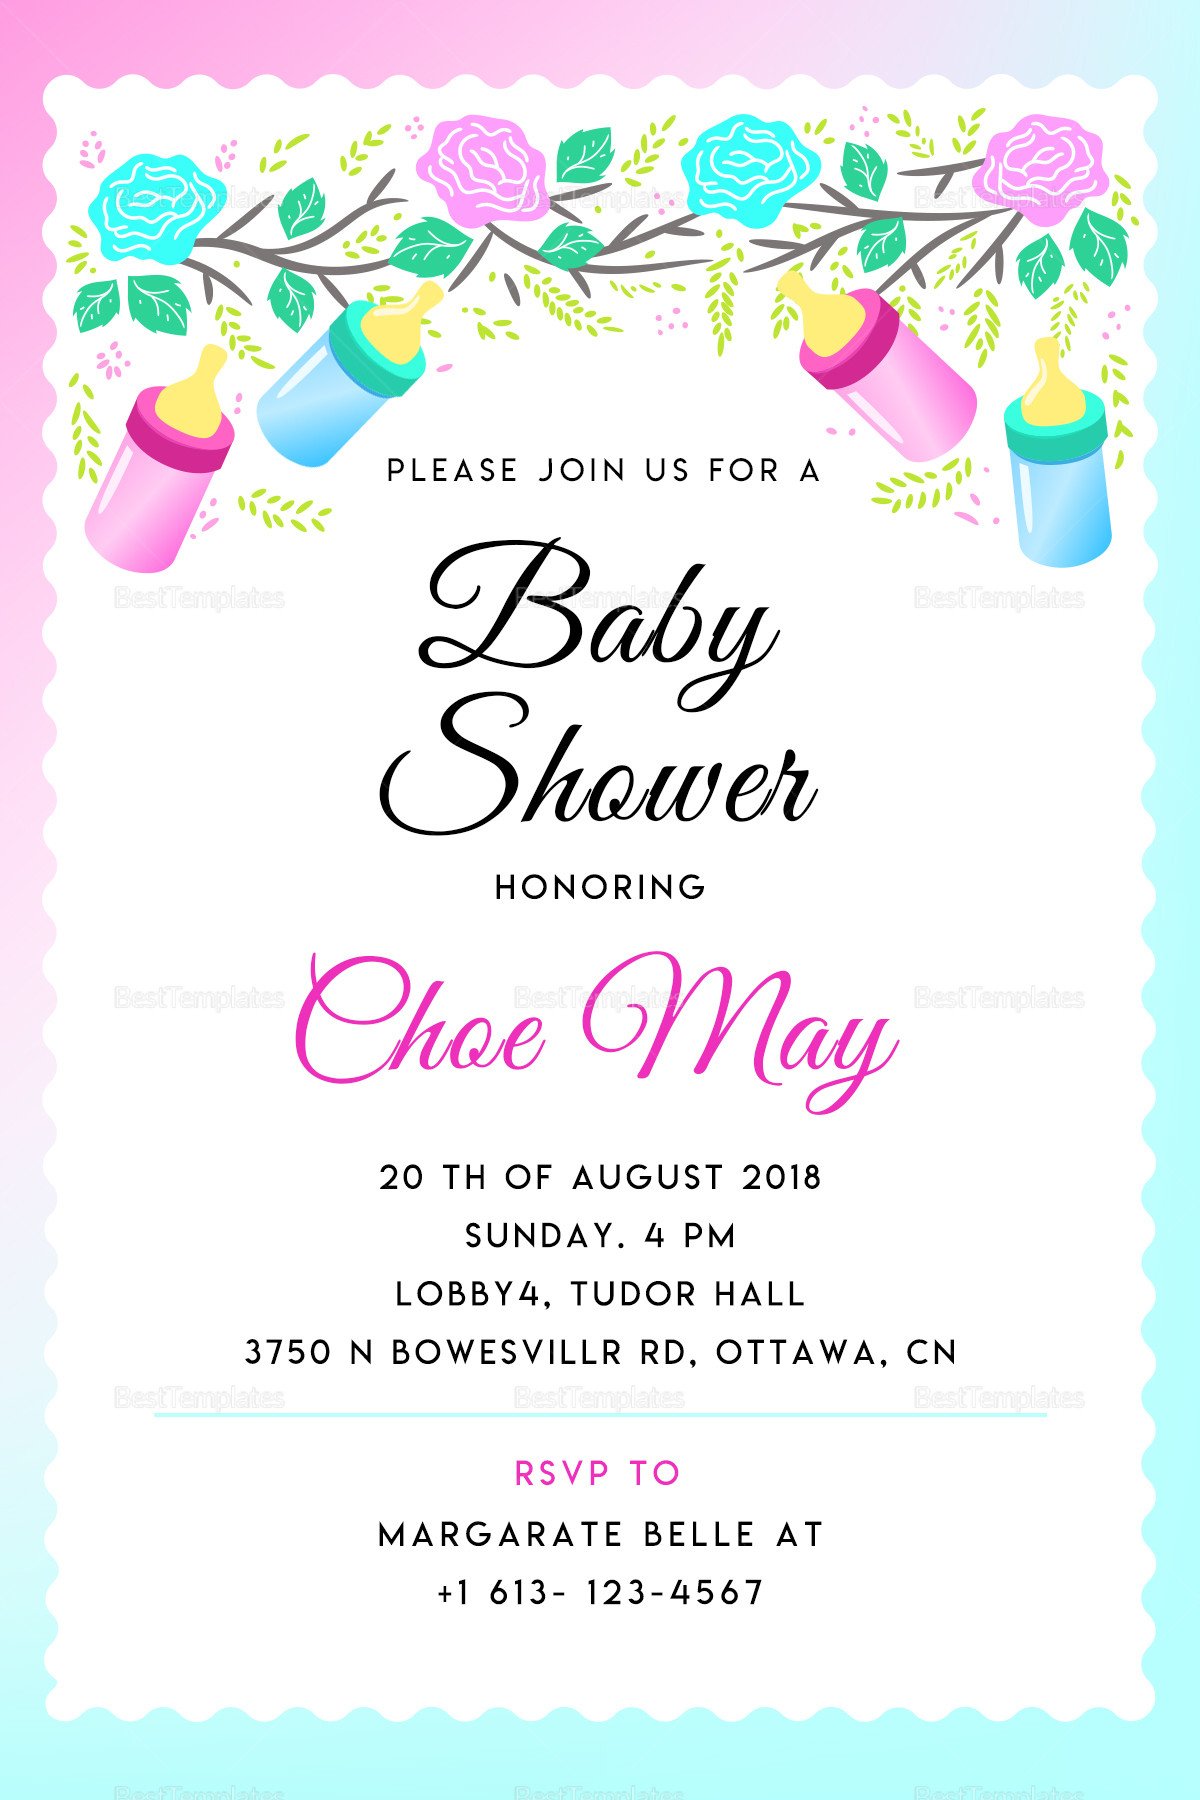 Editable Baby Shower Invitation Design Template in PSD